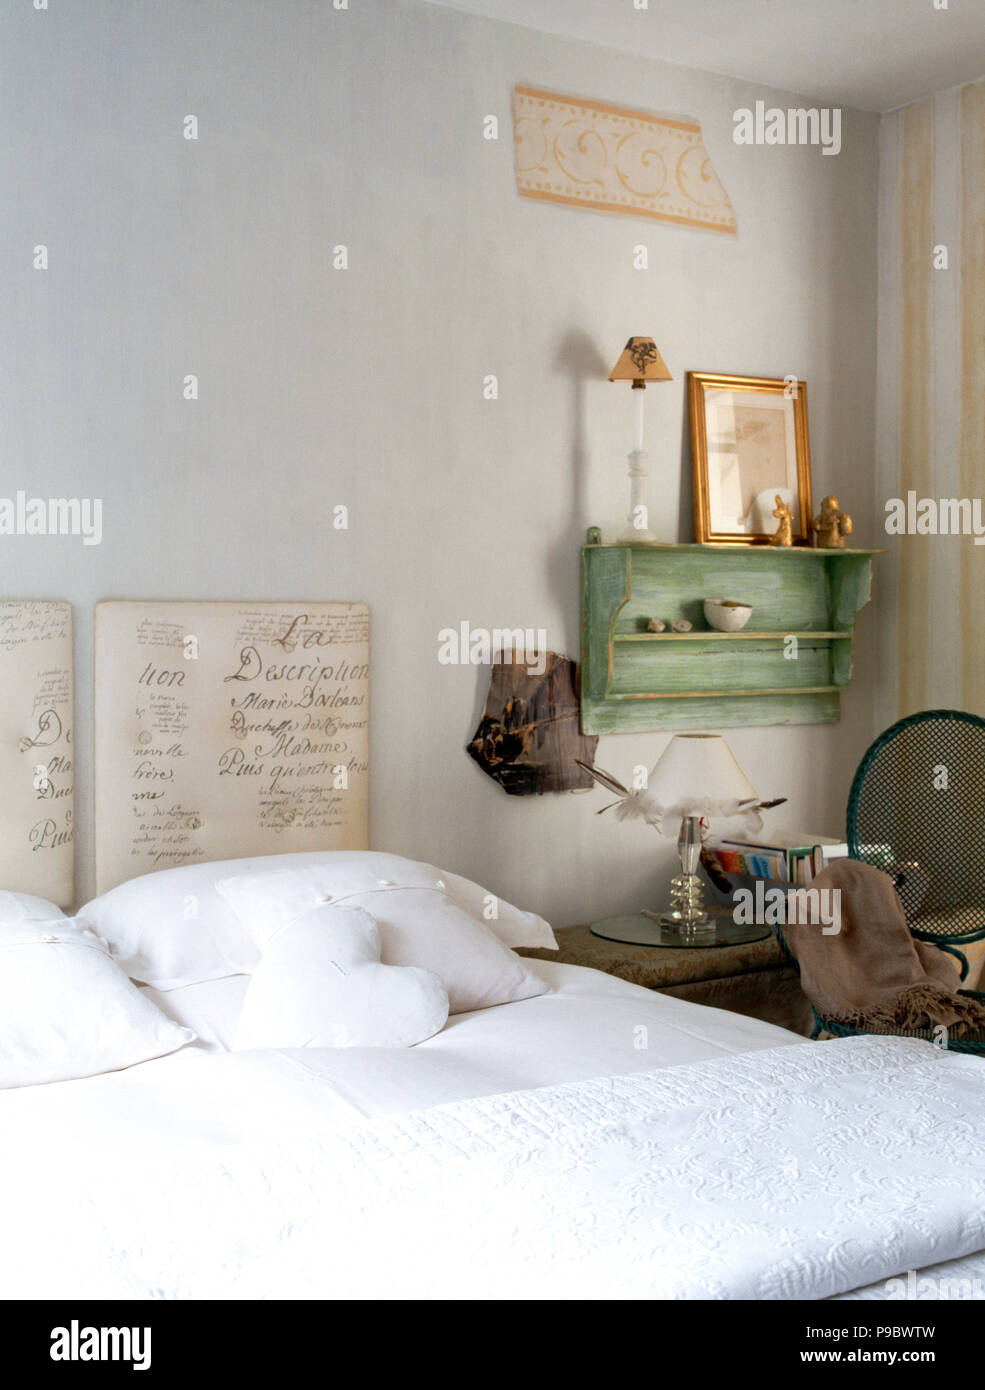 Bed with upholstered headboard with writing script pattern Stock Photo